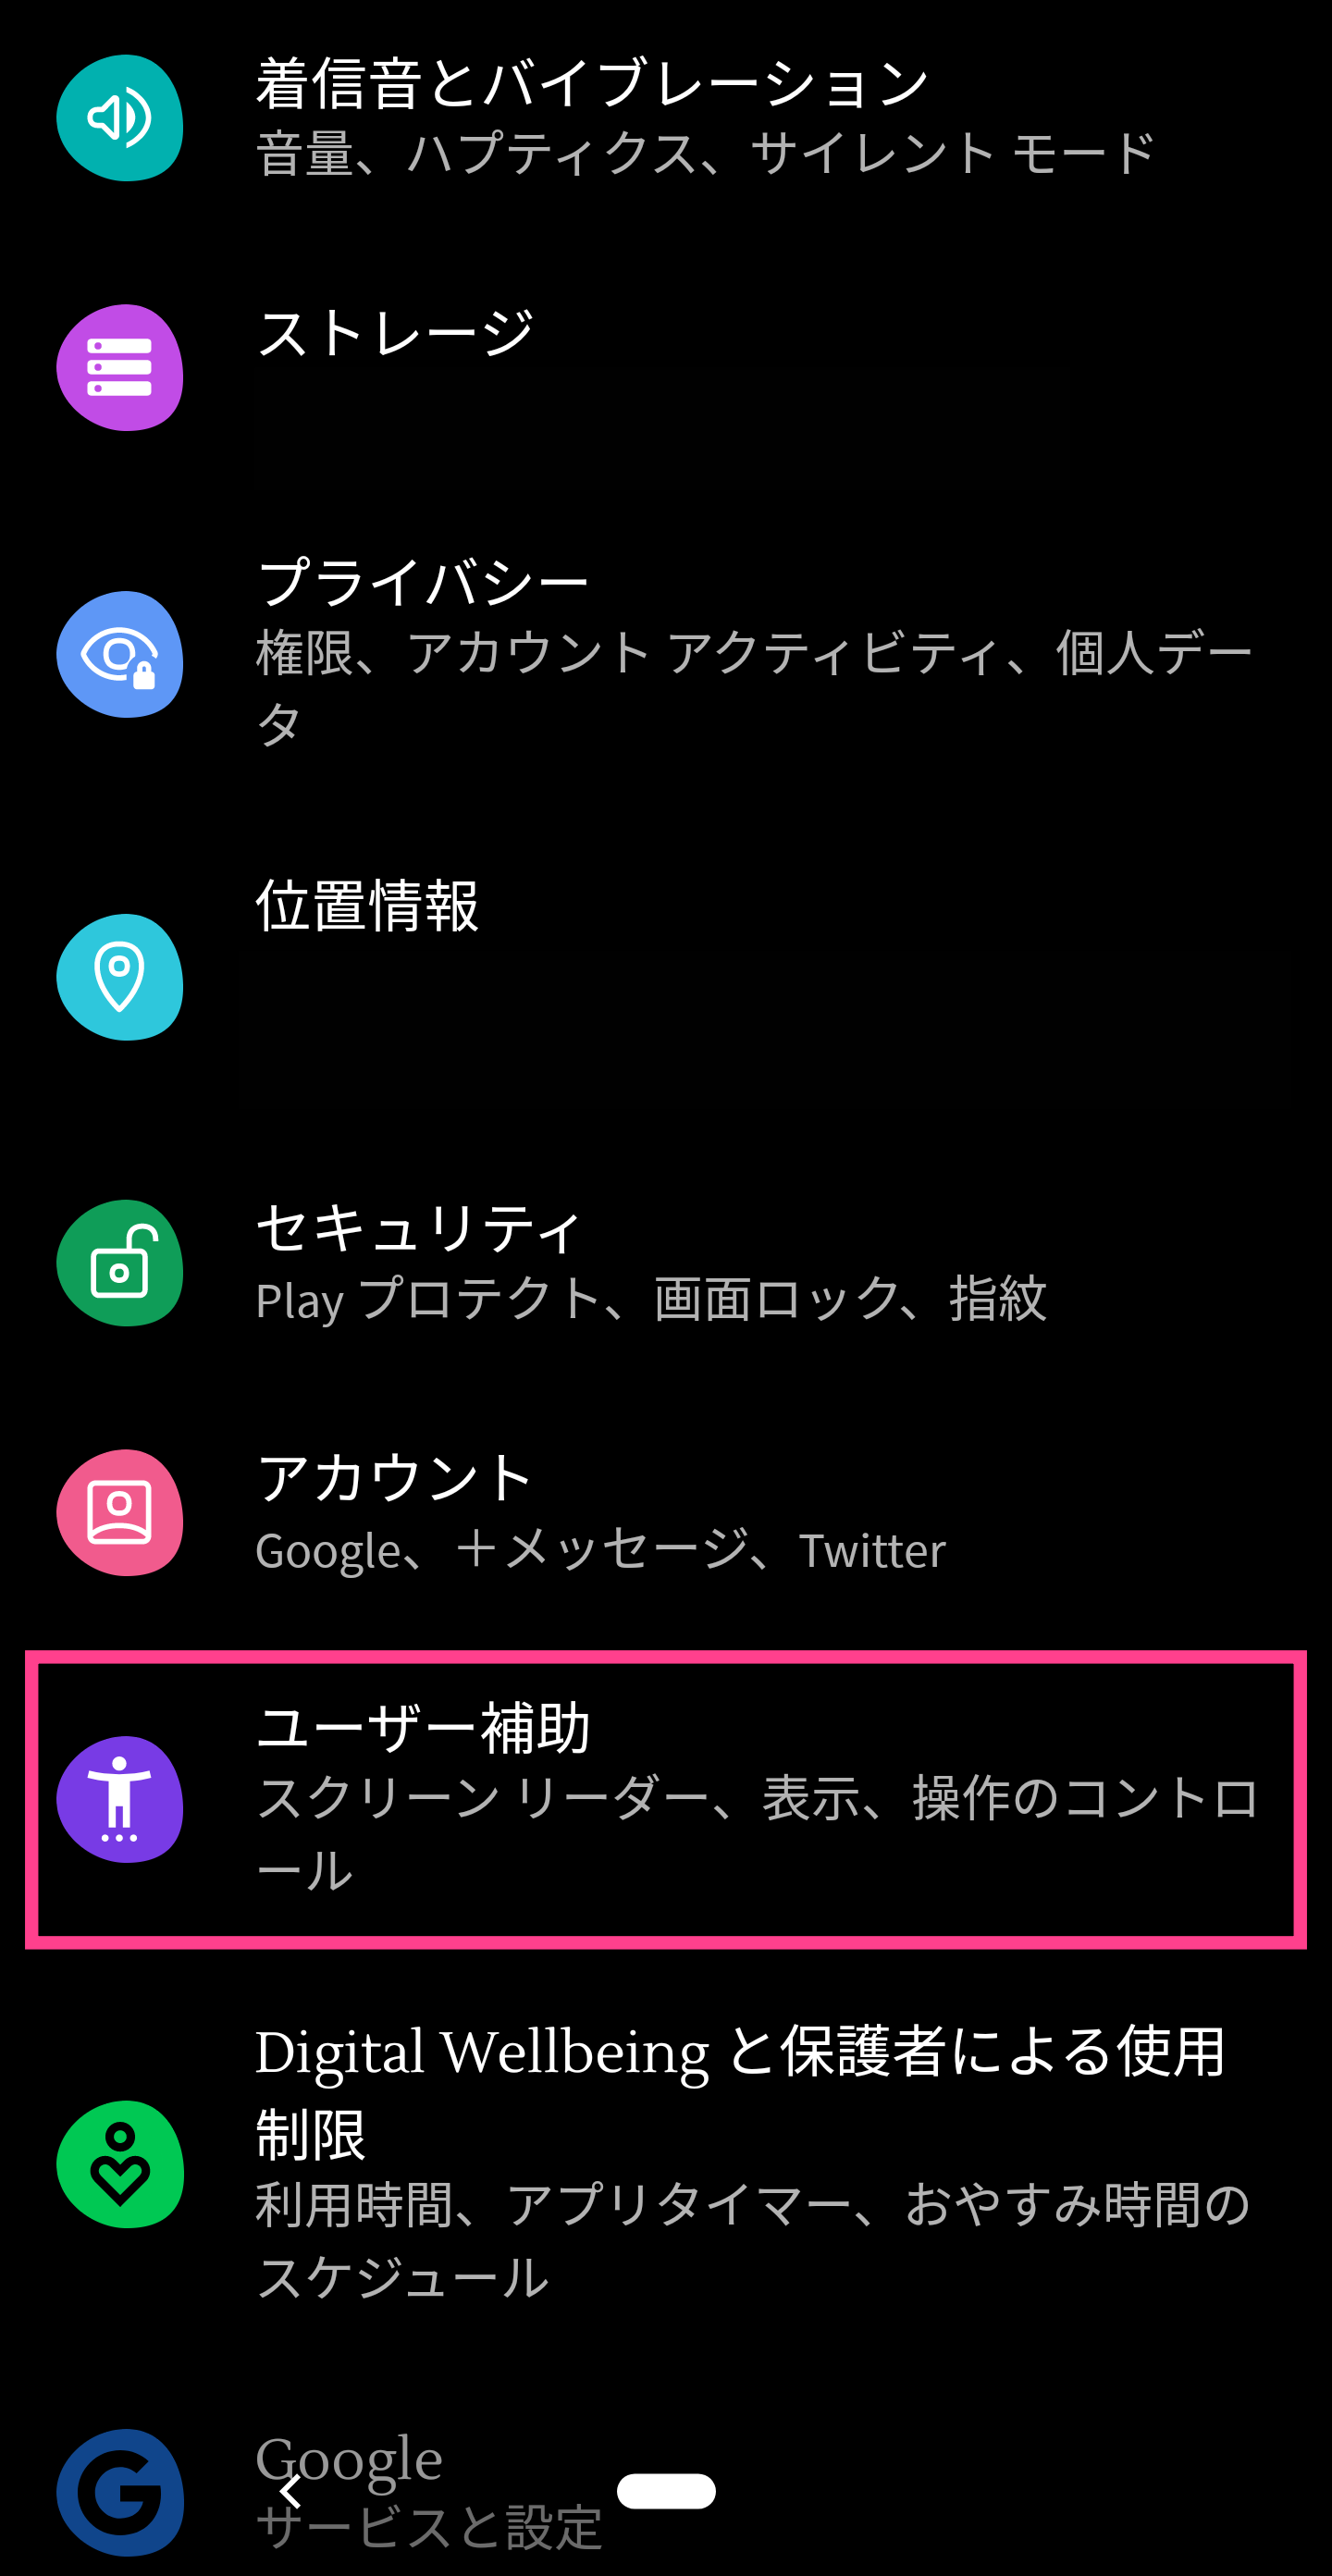 Androidユーザー補助